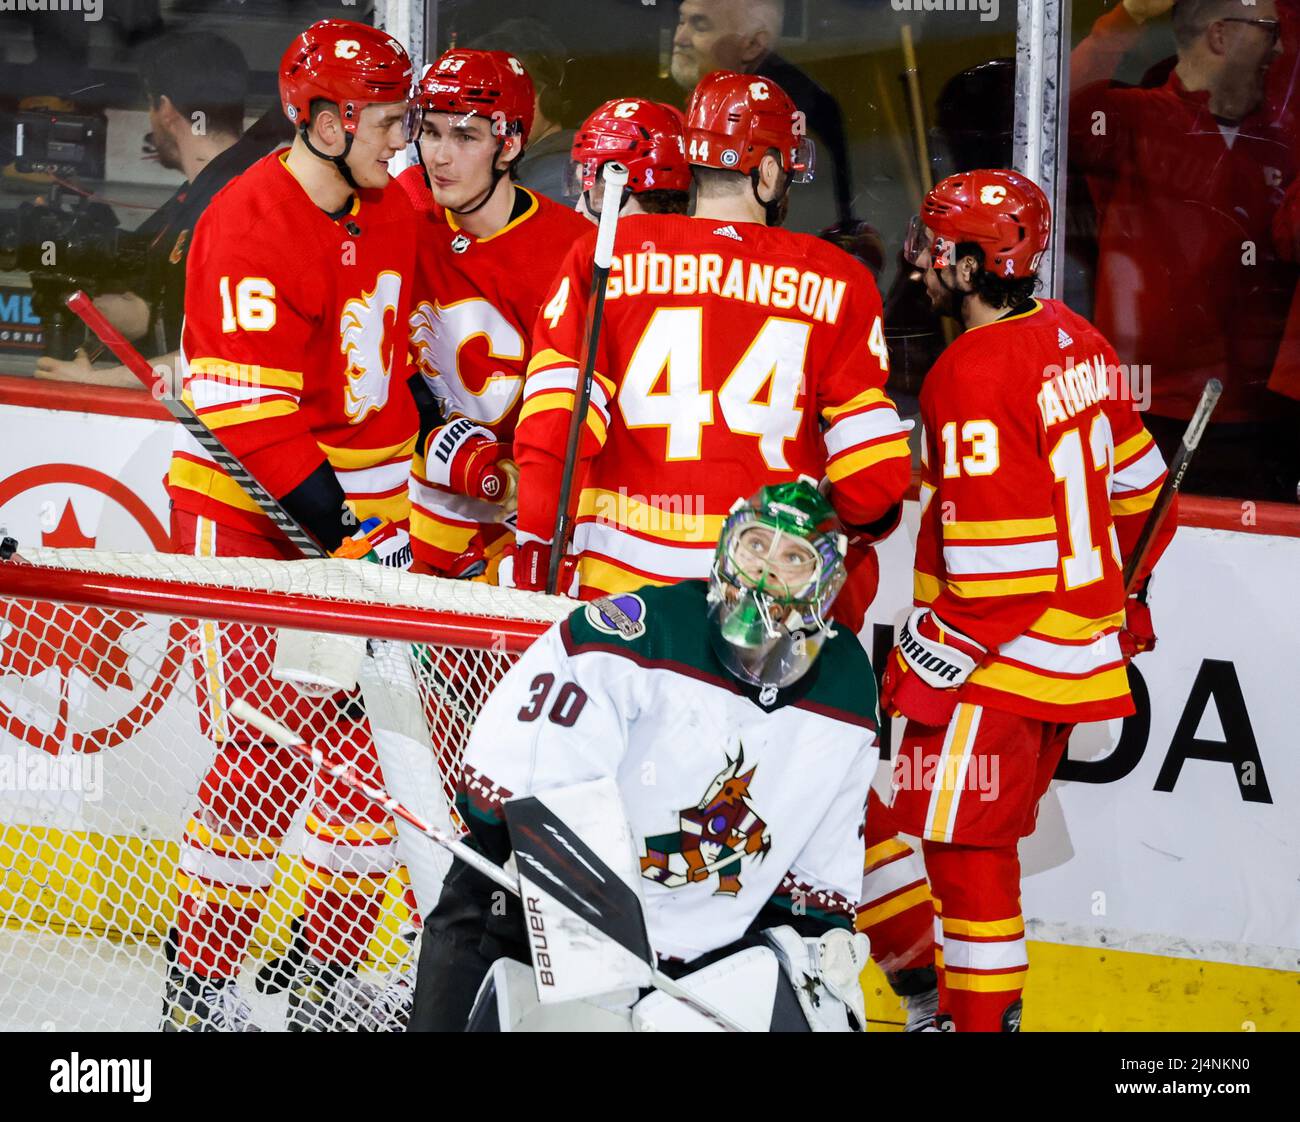 April 16, 2022, Calgary, AB, CANADA: Arizona Coyotes' Nathan Smith, left,  is checked by Calgary Flames' Rasmus Andersson, centre, as goalie Jacob  Markstrom blocks the net during third period NHL hockey action